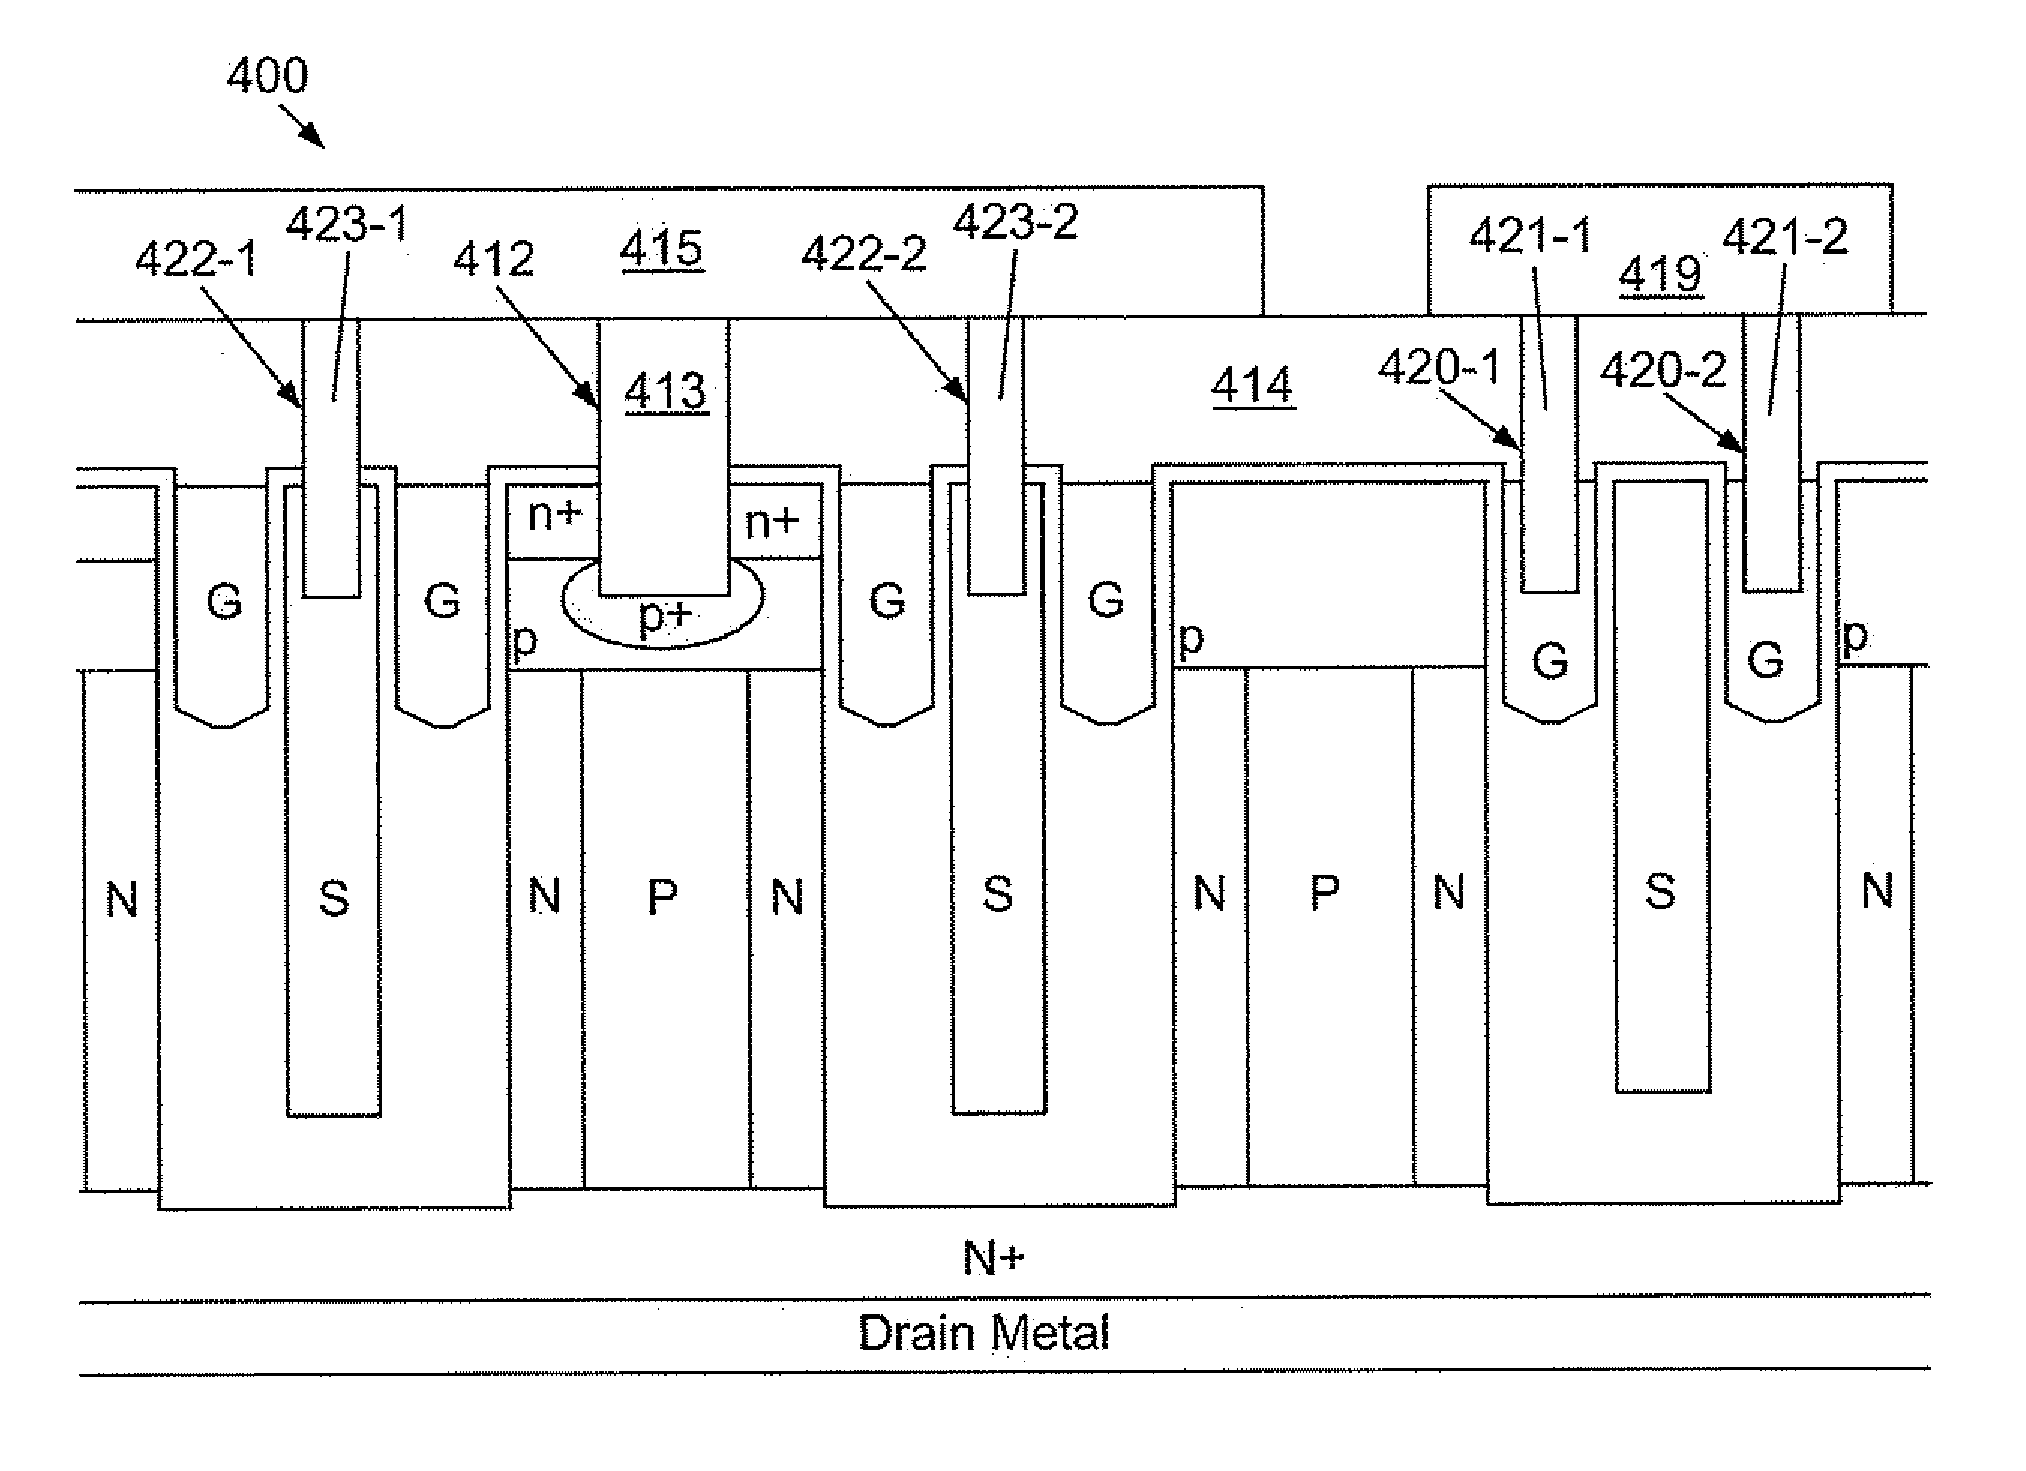 Super-junction trench mosfet with multiple trenched source-body contacts